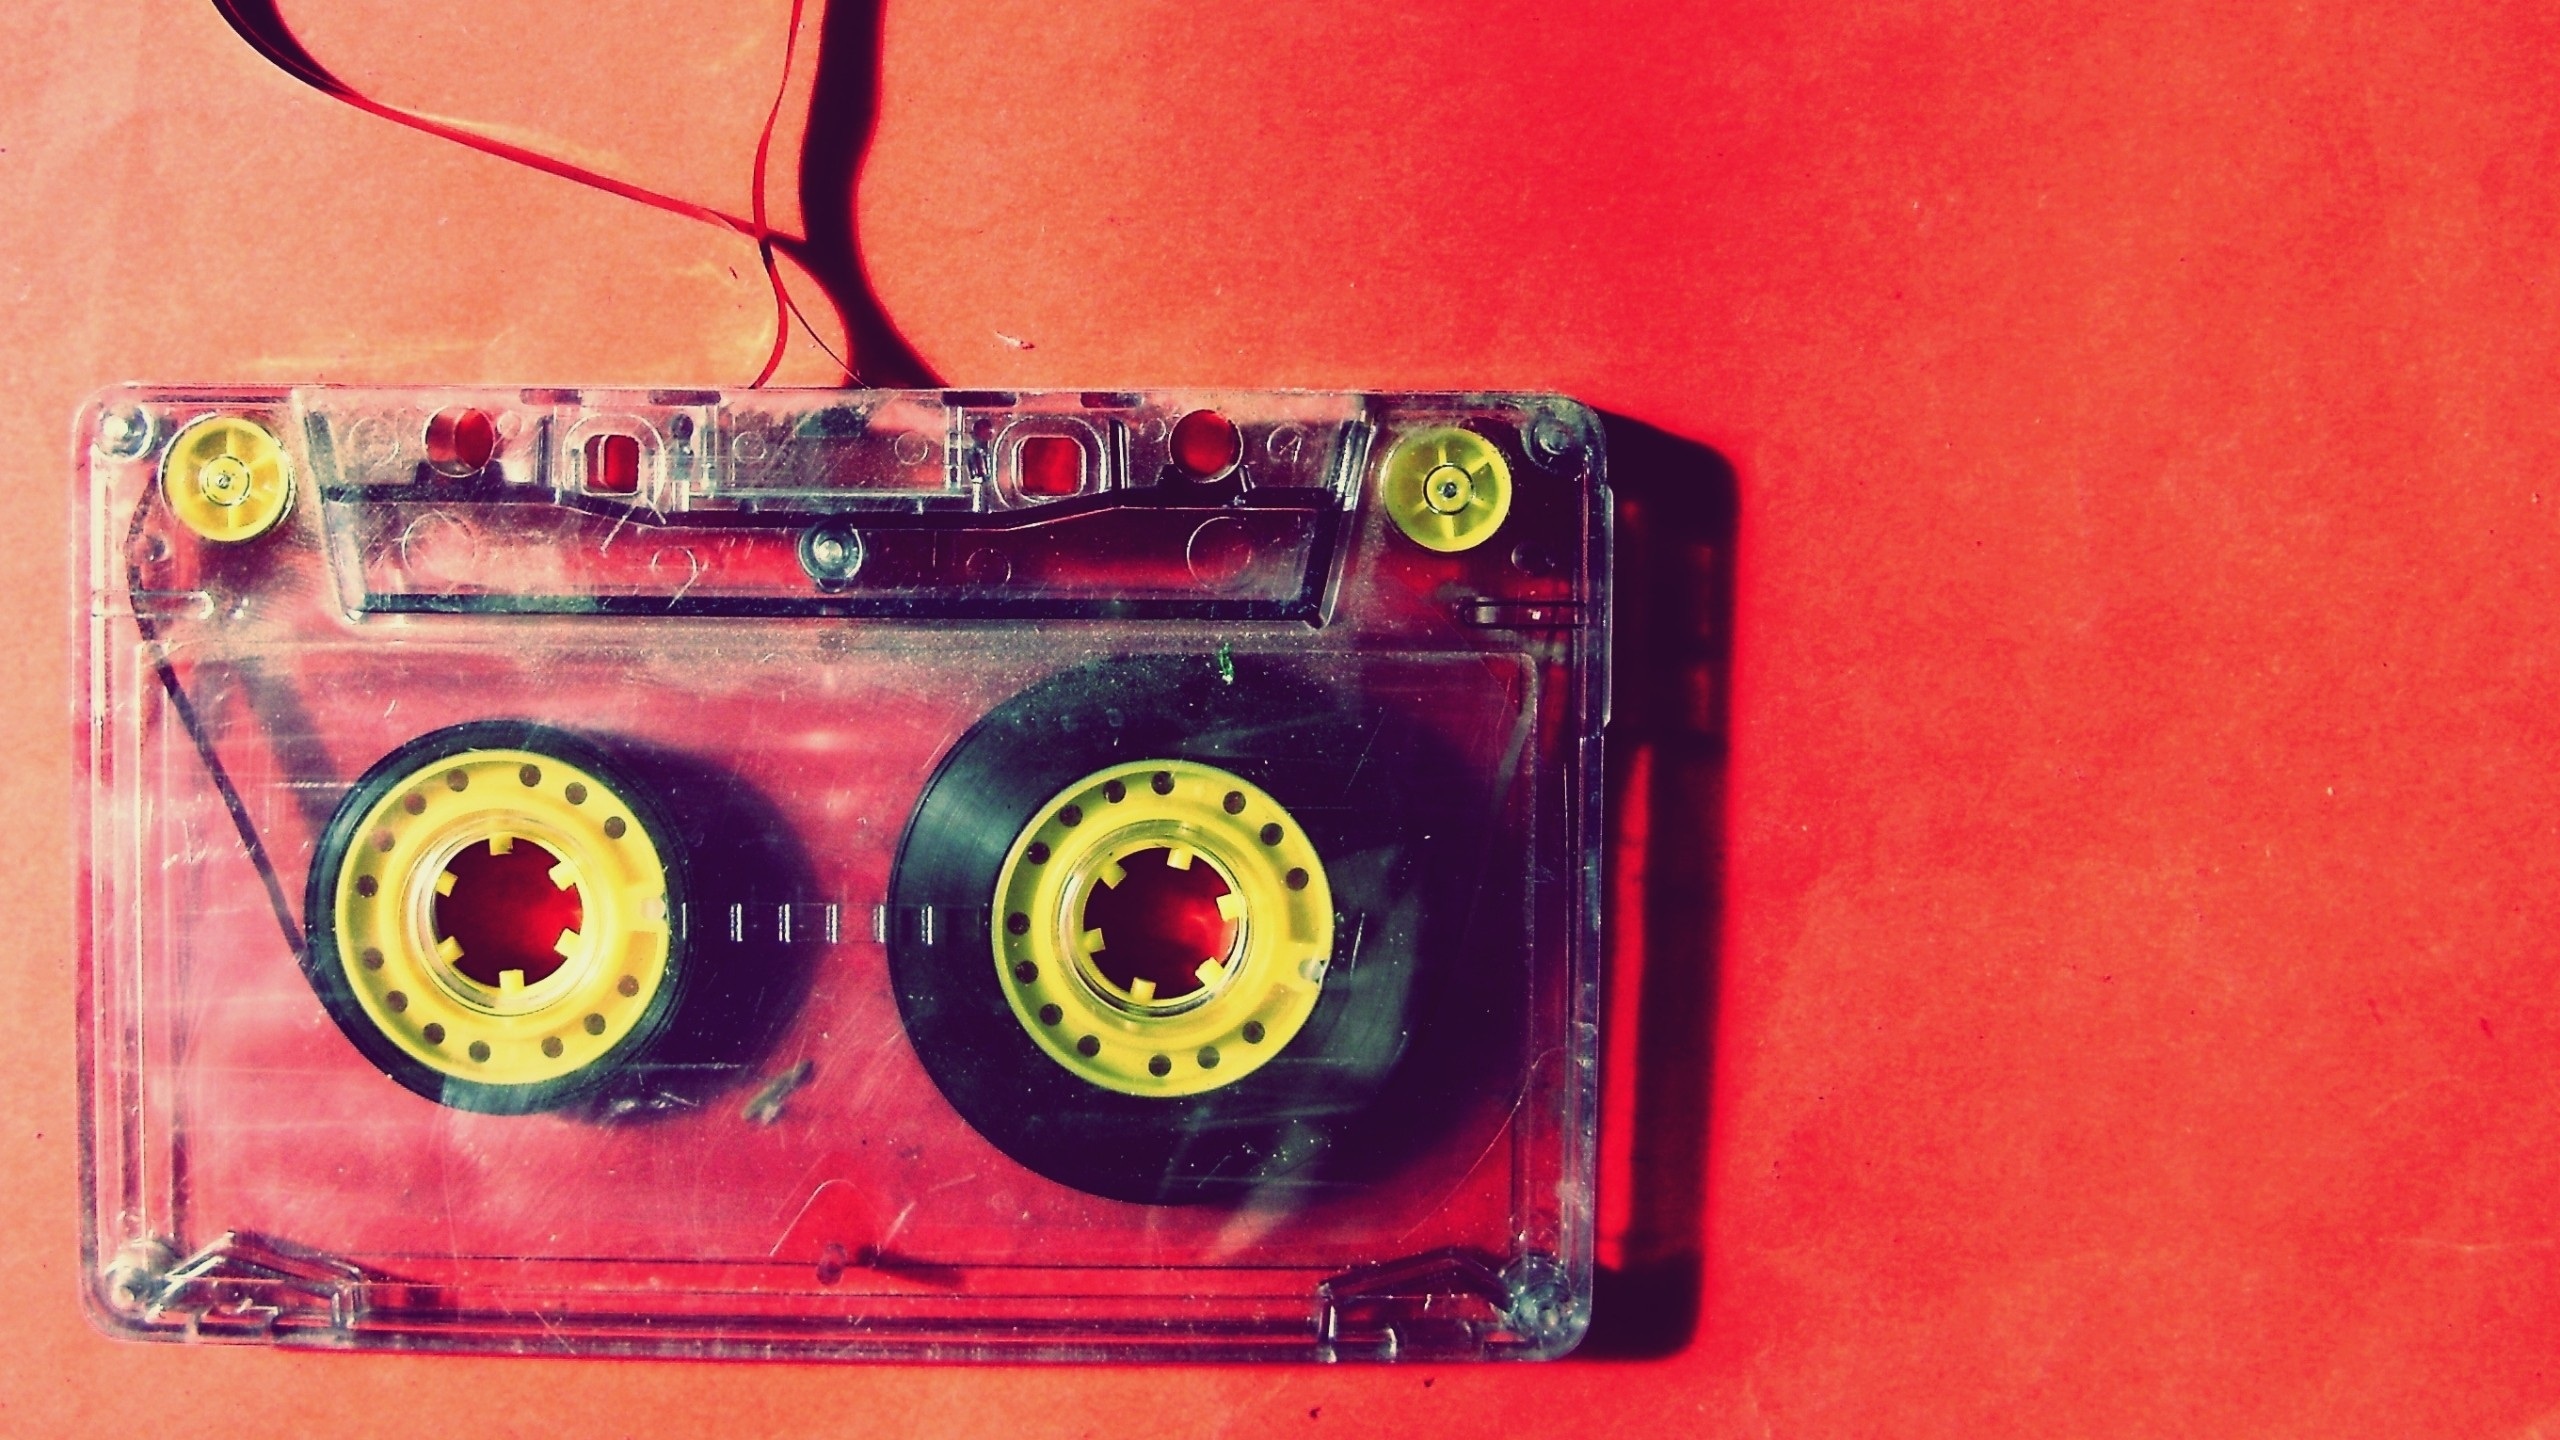 Image of a vintage cassette tape in reds and yellows courtesy of pxhere